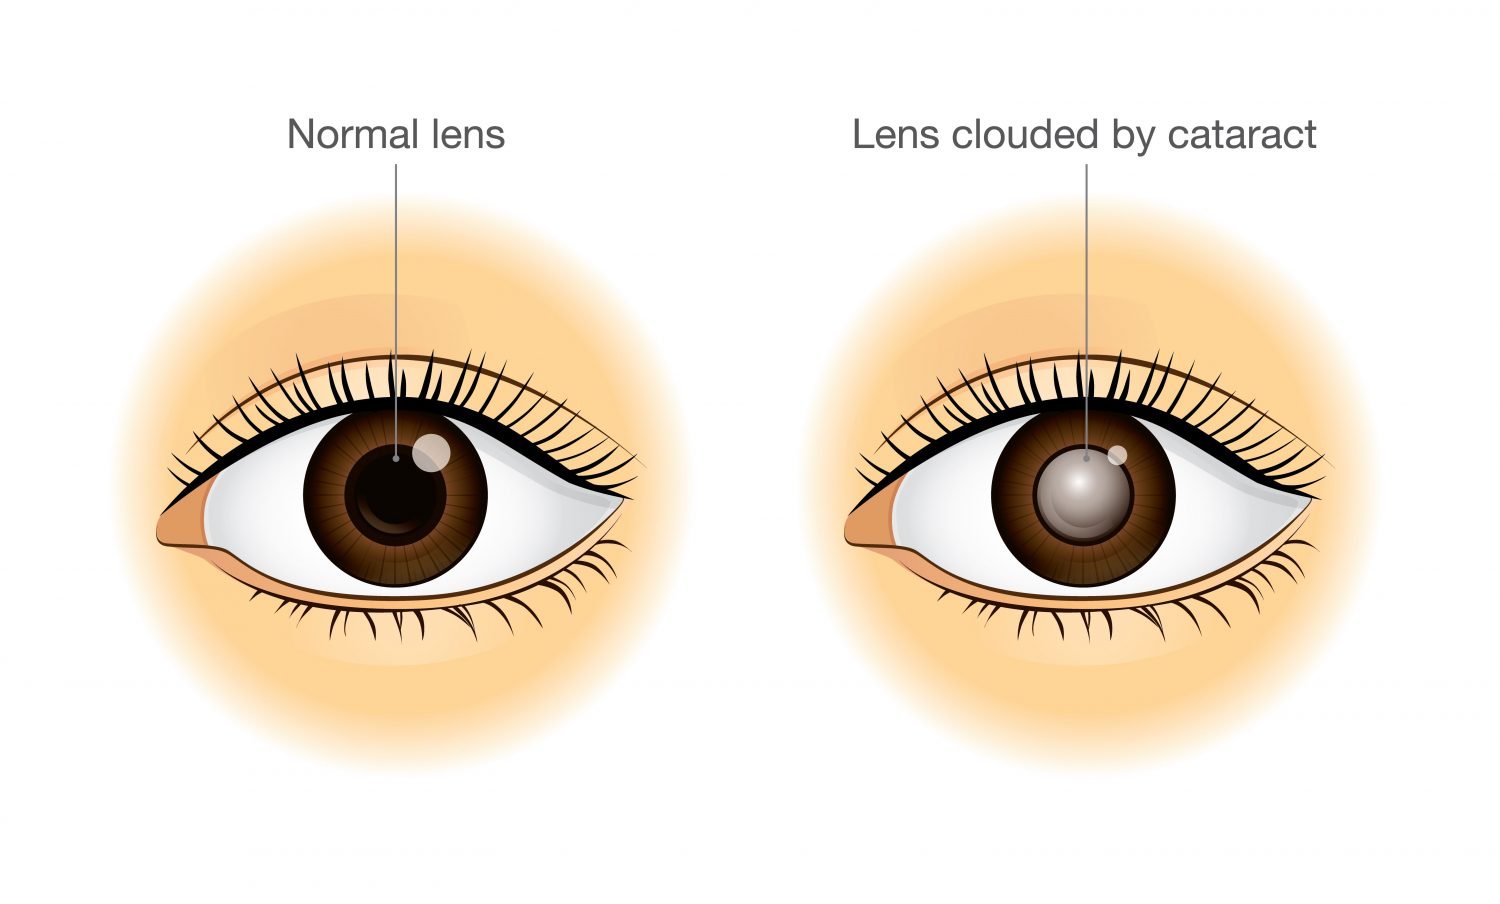 Comparison of Normal Lens and Lens clouded by Cataract